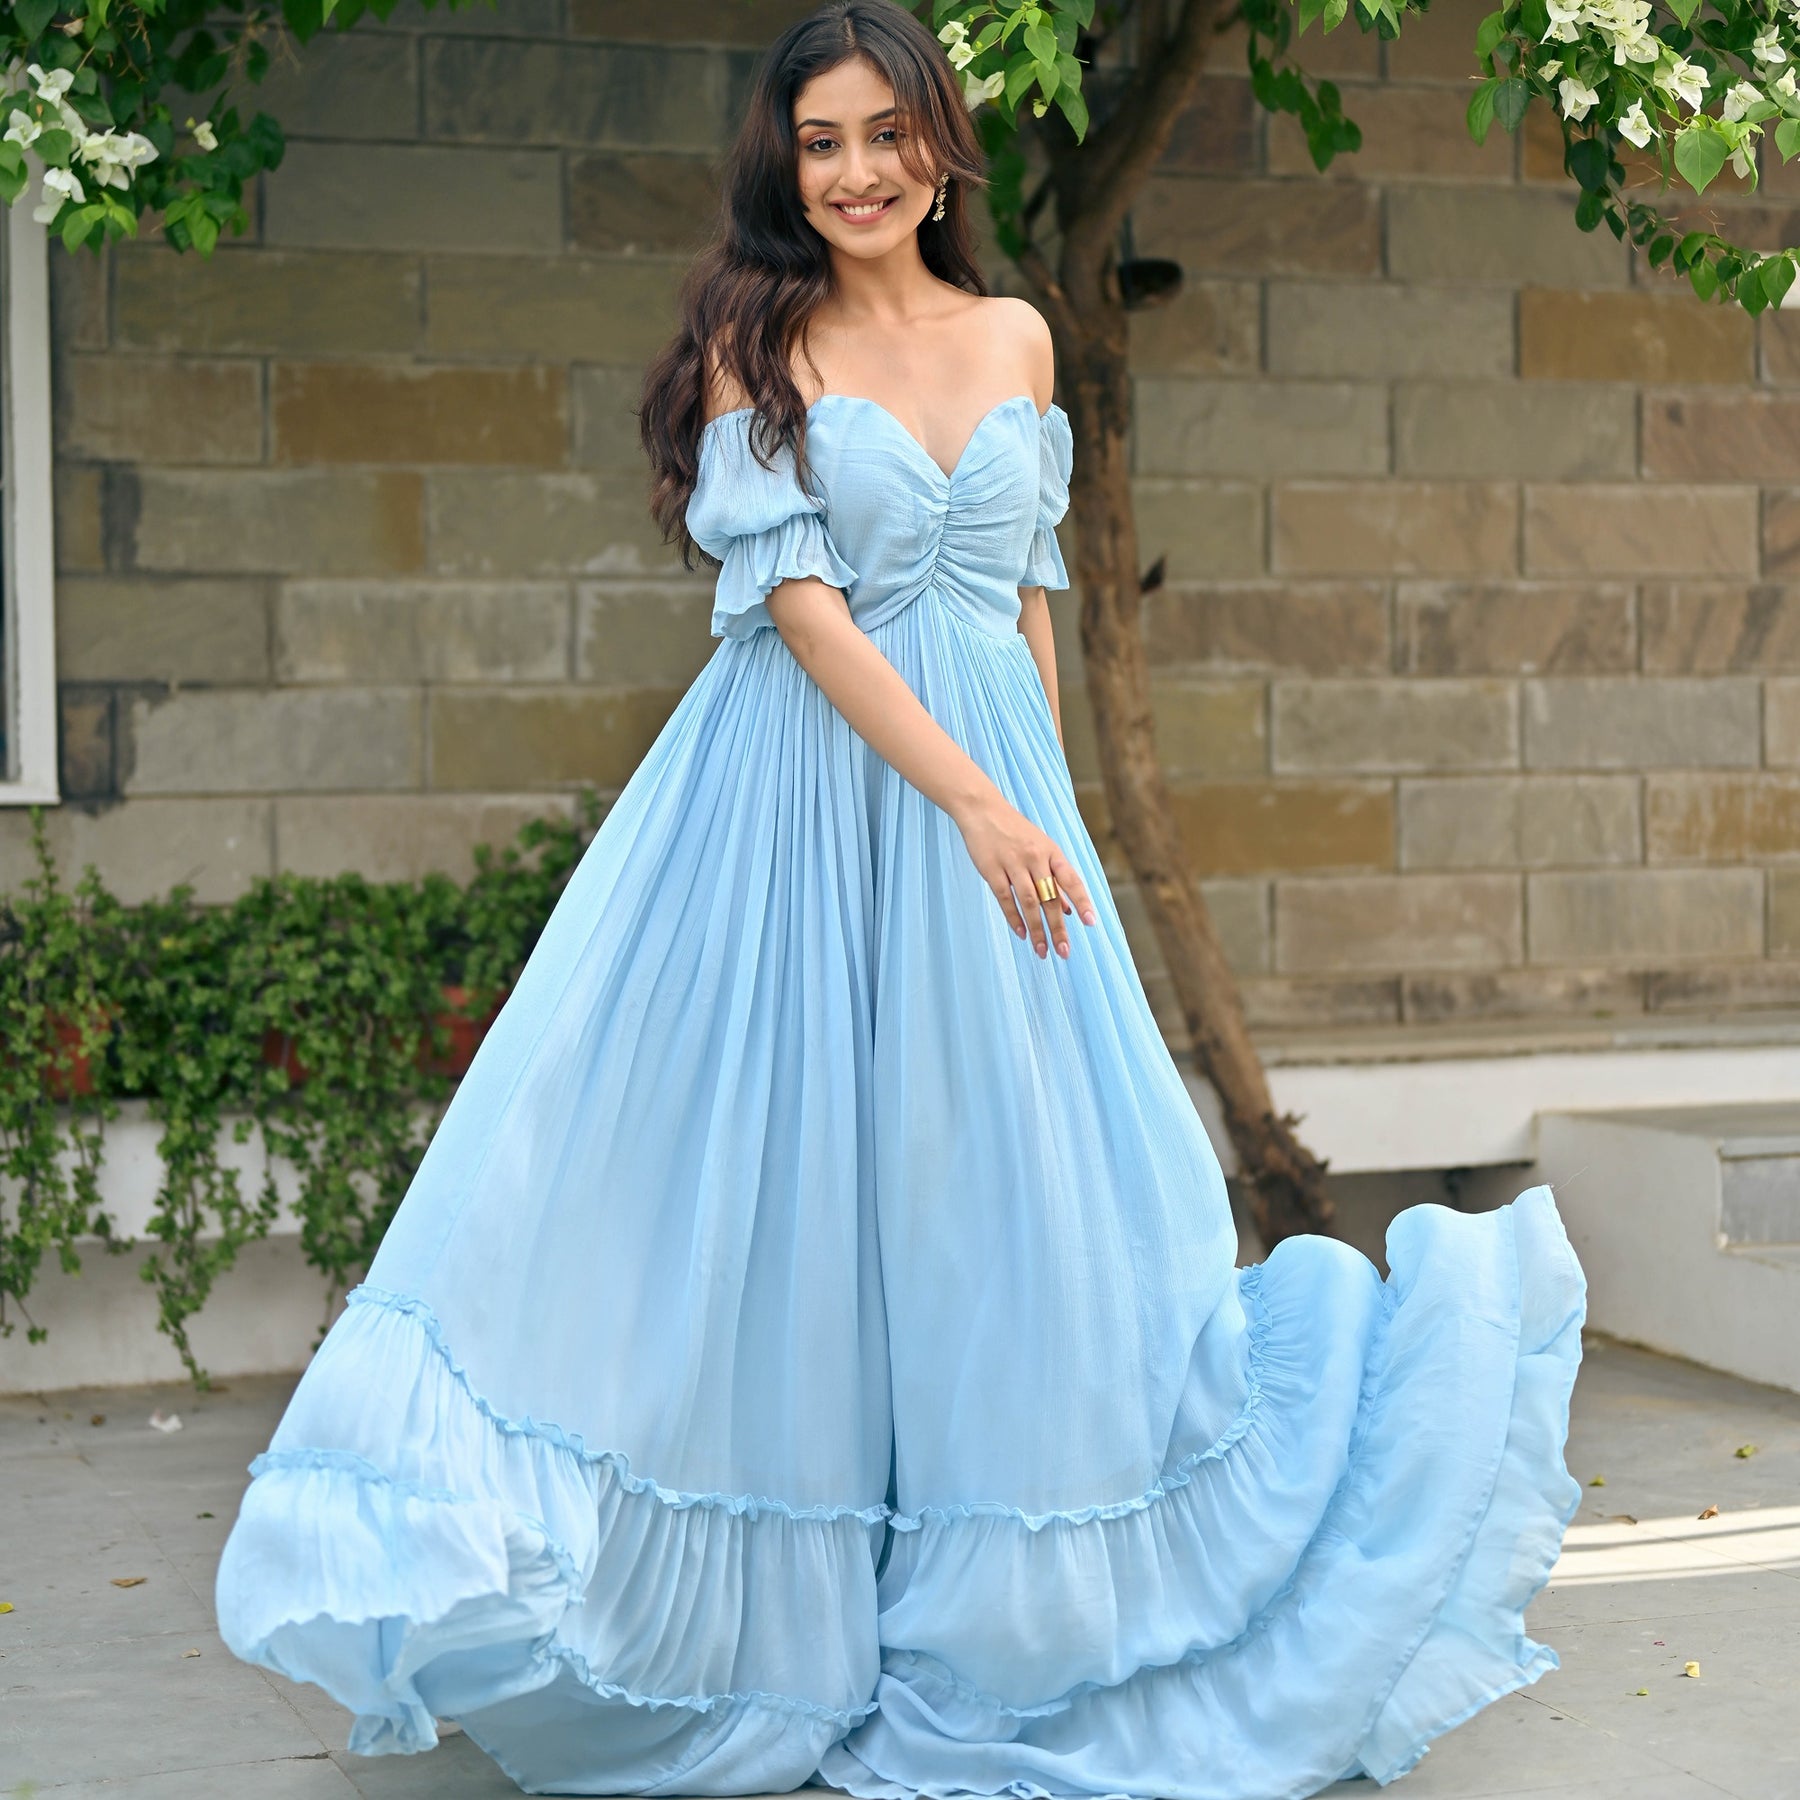 Cinderella – A Juvenile Dream of Damsels & An Inspiration For The Would-Be  Brides | VERBENA INDIA | Beautiful gowns, Wedding attire, Cinderella dresses